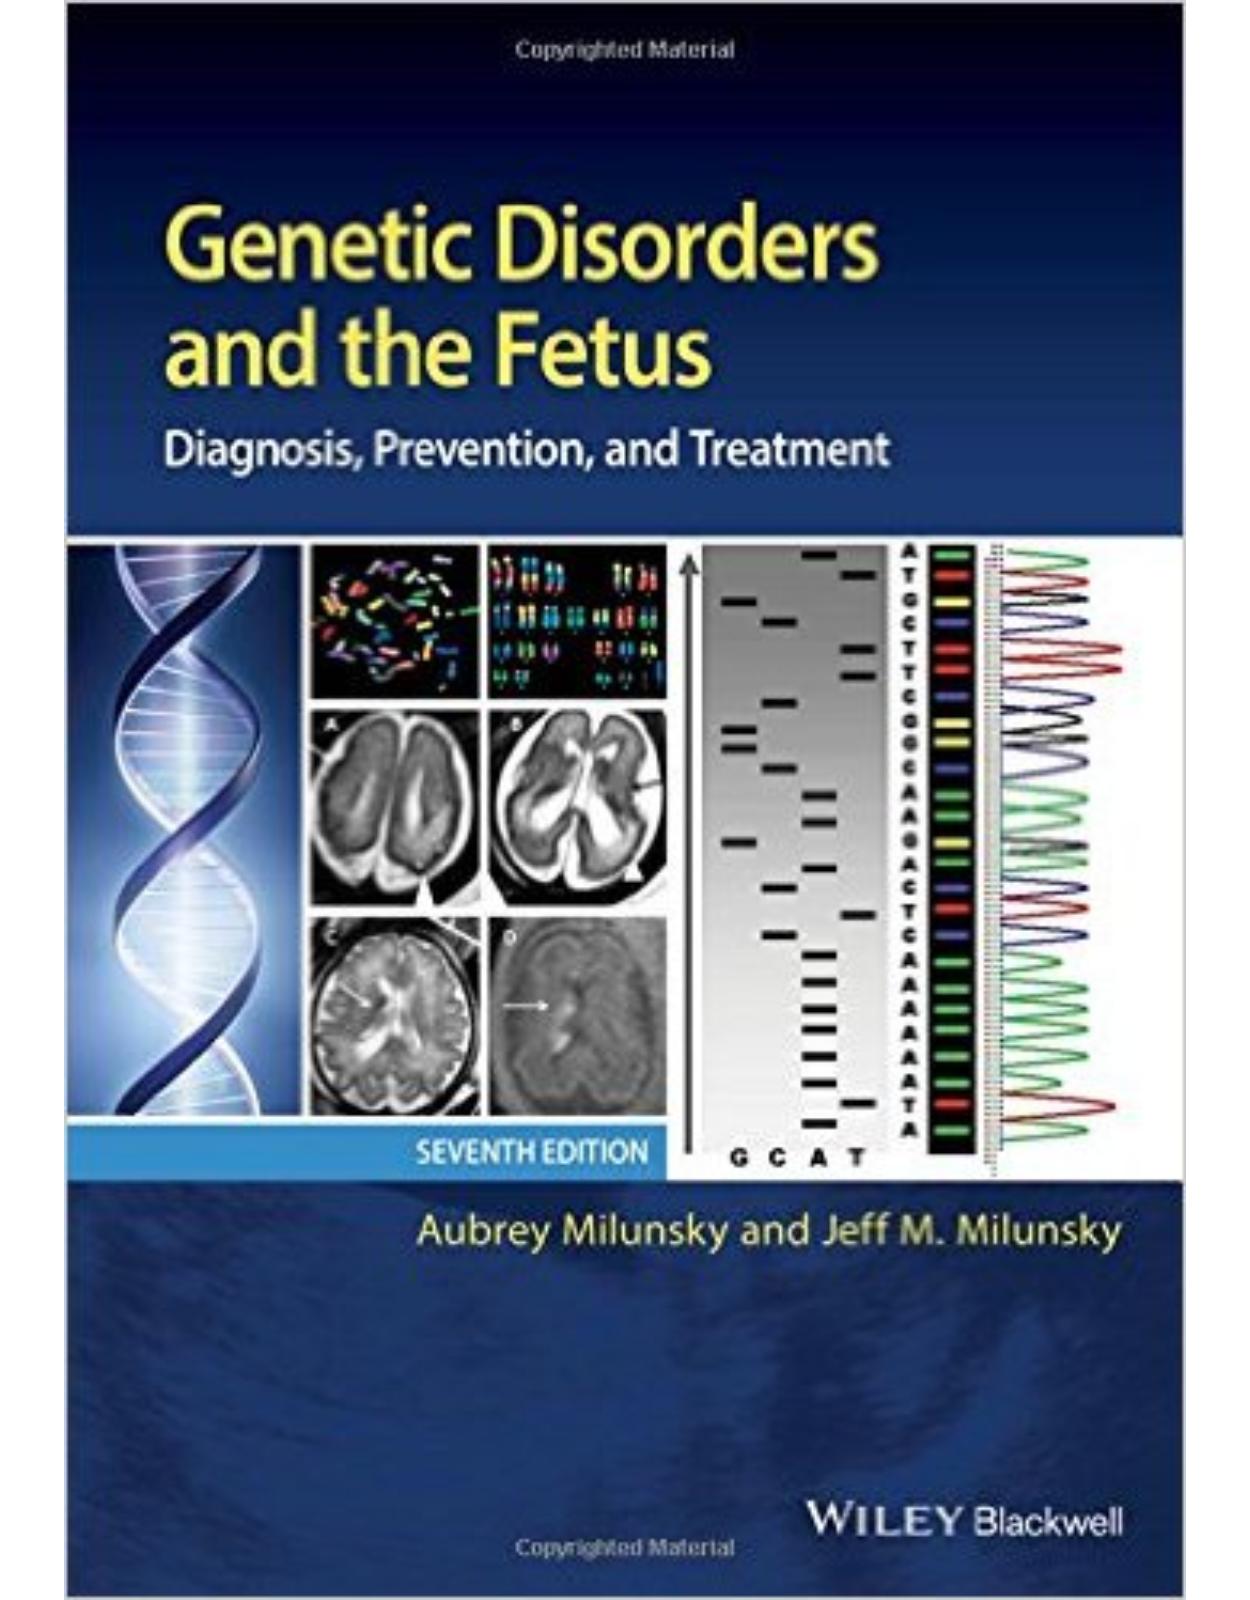 Genetic Disorders and the Fetus: Diagnosis, Prevention and Treatment